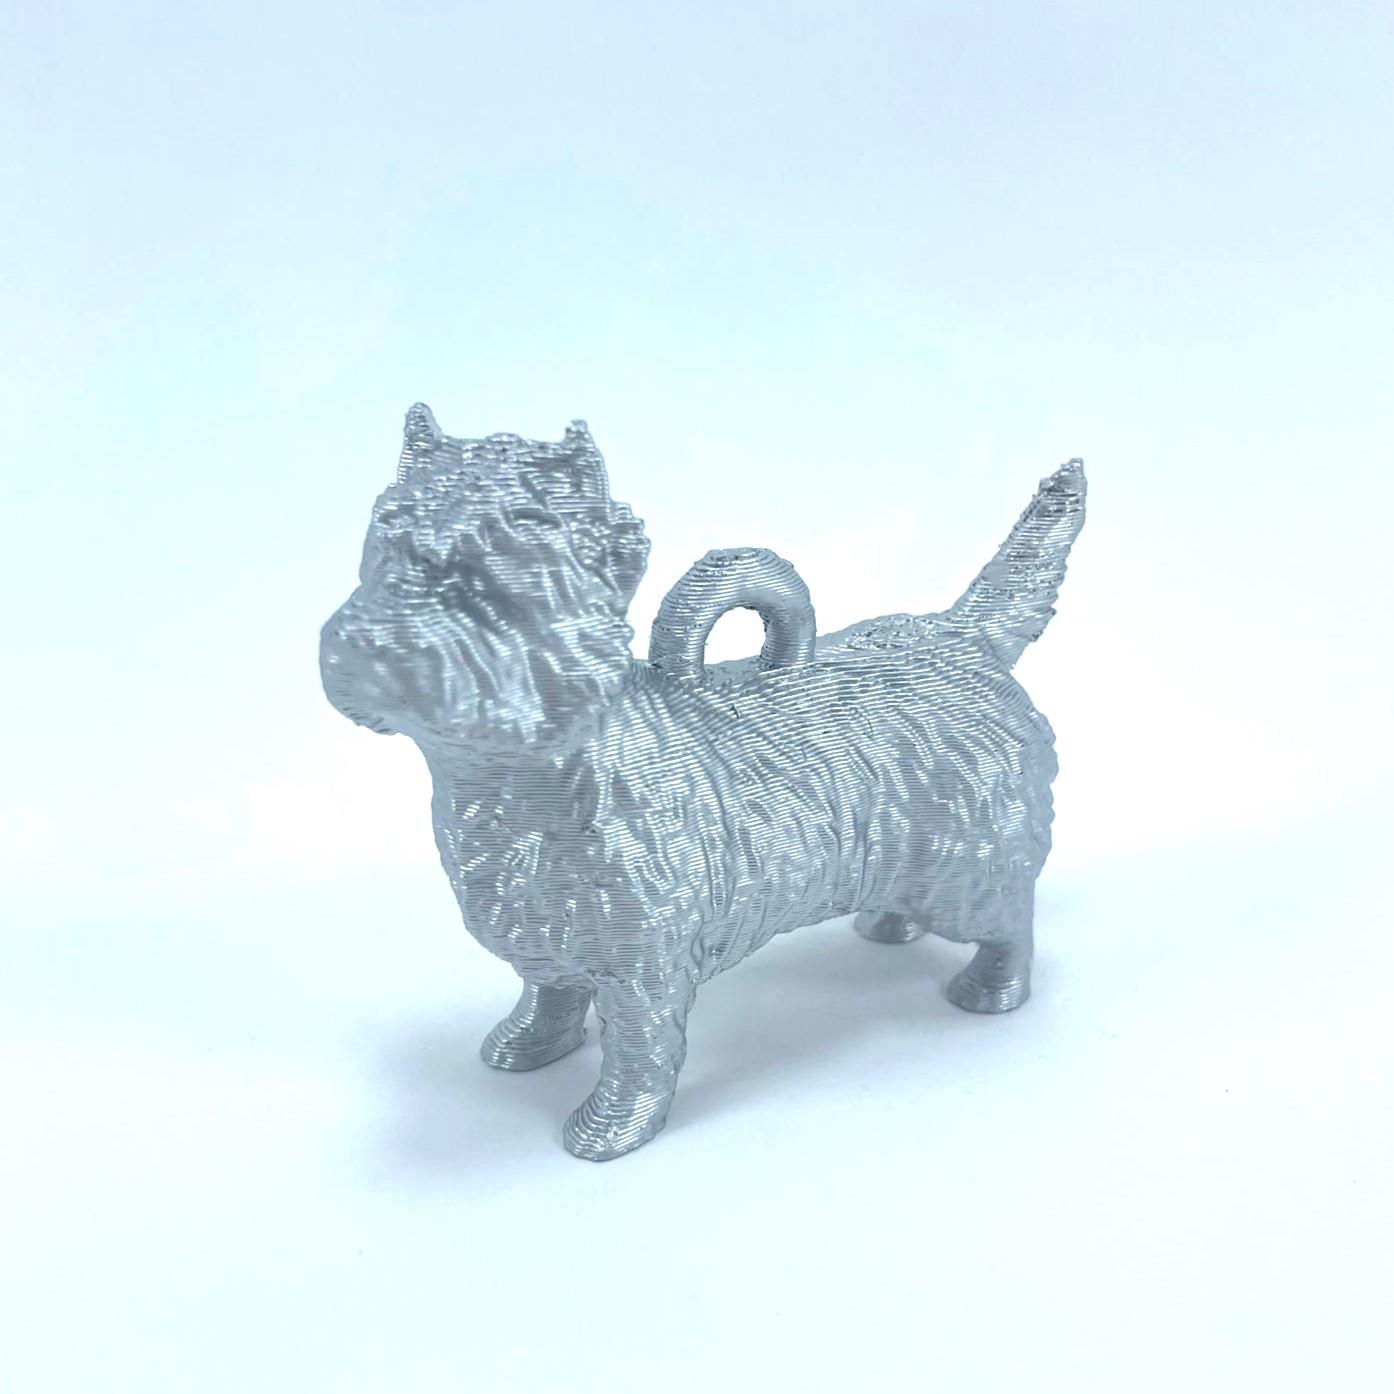 Cairn Terrier Dog Christmas Tree Bauble Decoration Ornament For Christmas Xmas Noel - 3DCabin